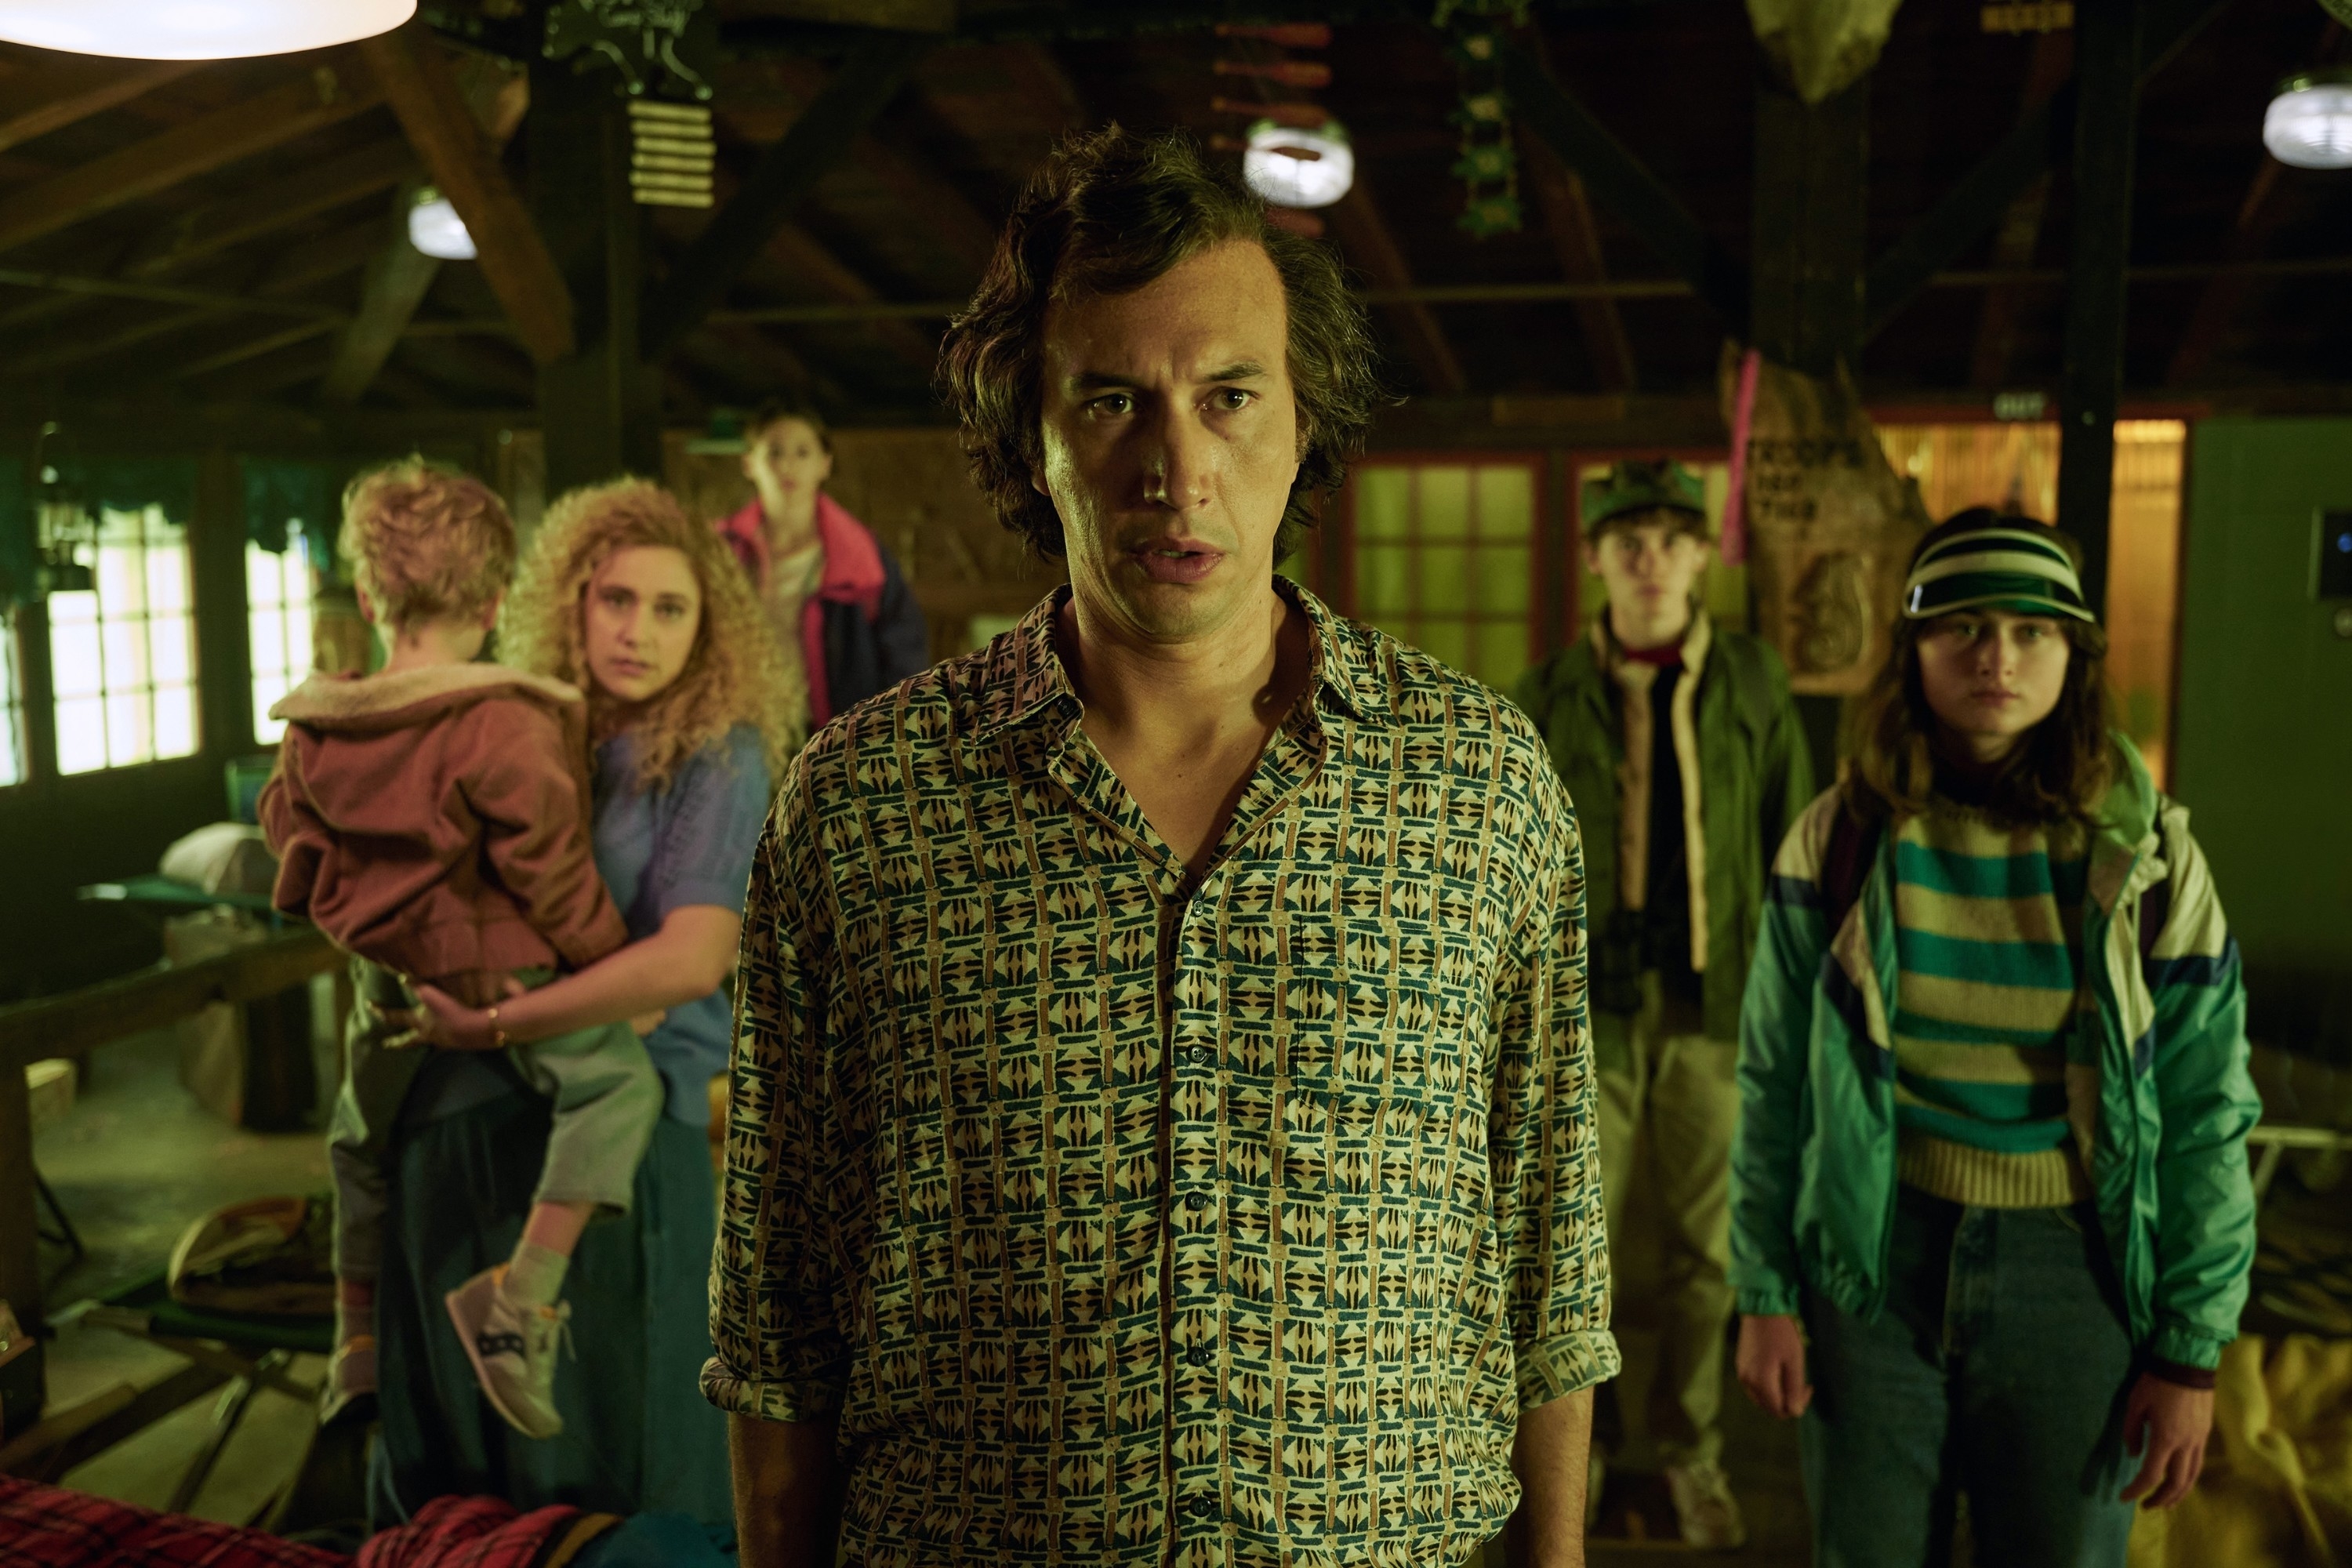 him and a family behind him in the film